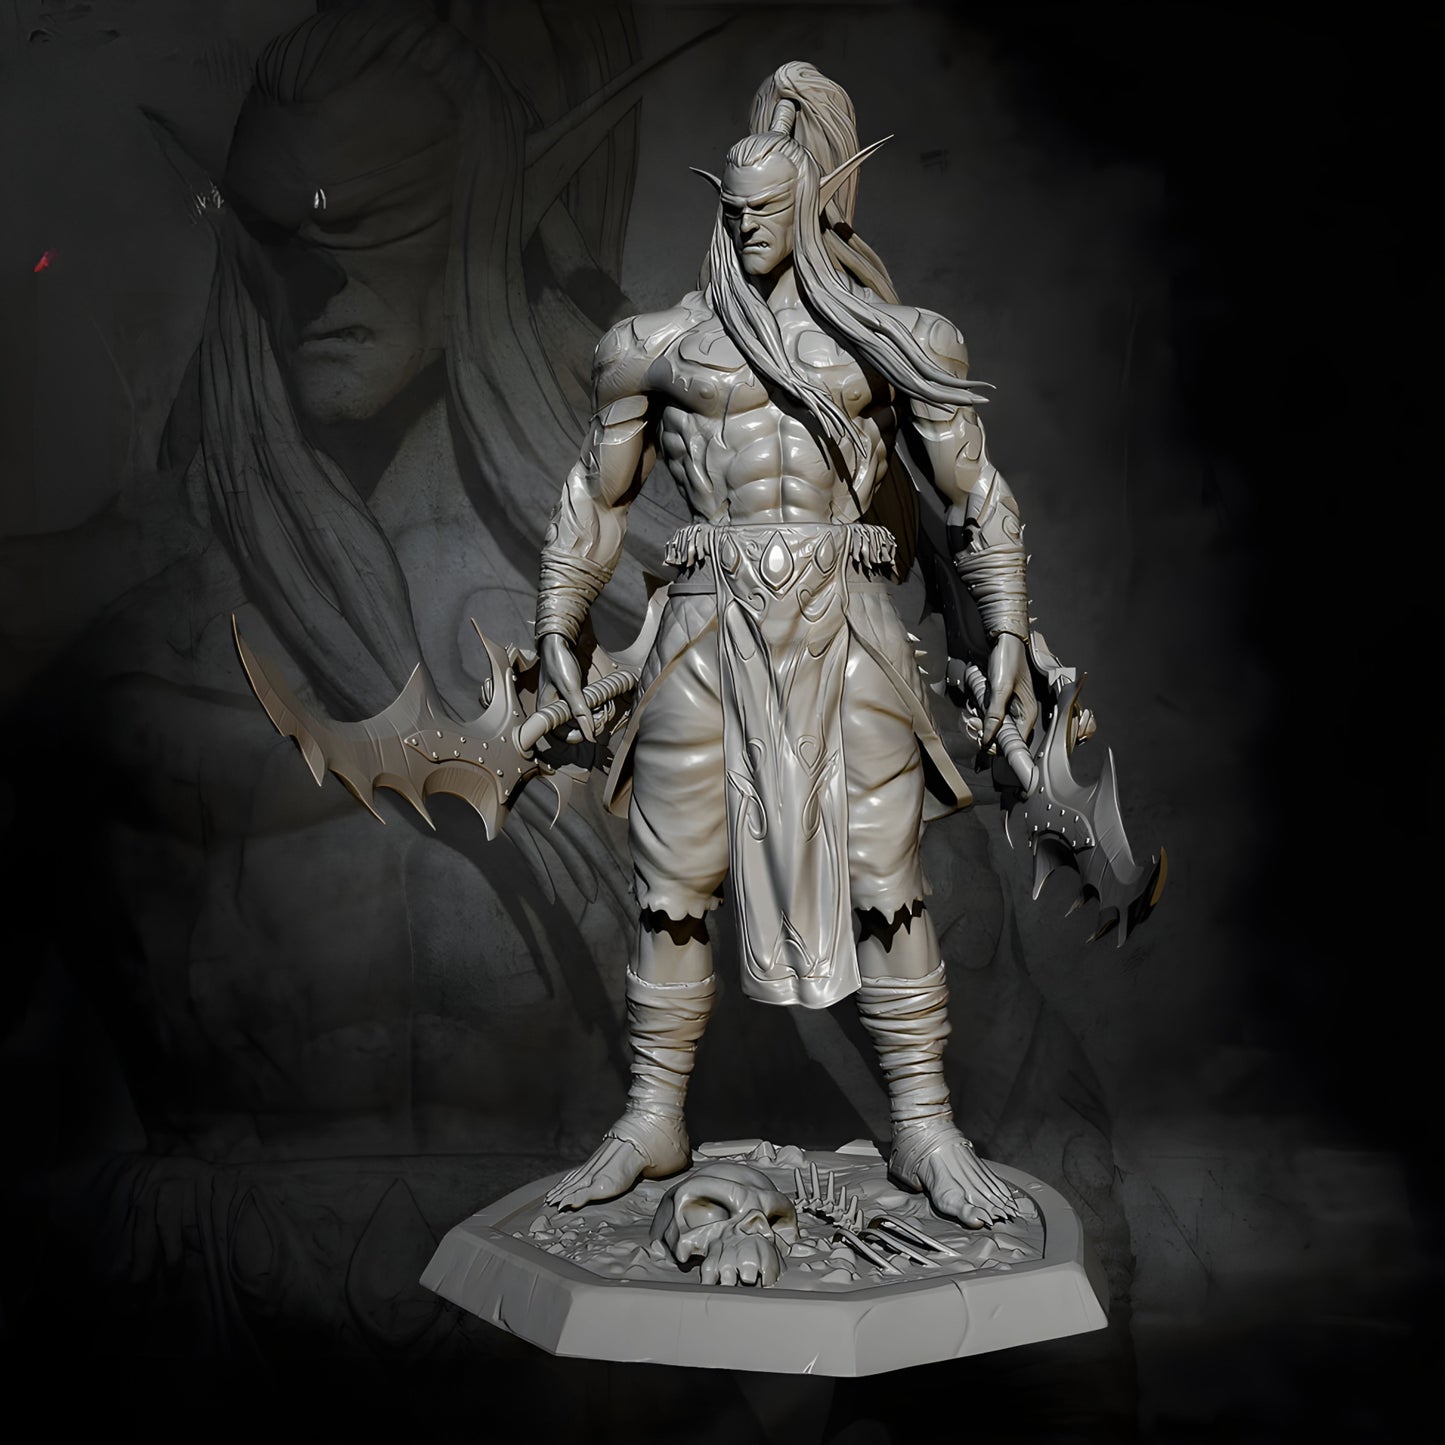 18+ Collector's 3D Printed Model: 75MM Resin model kits self-assemlbed.